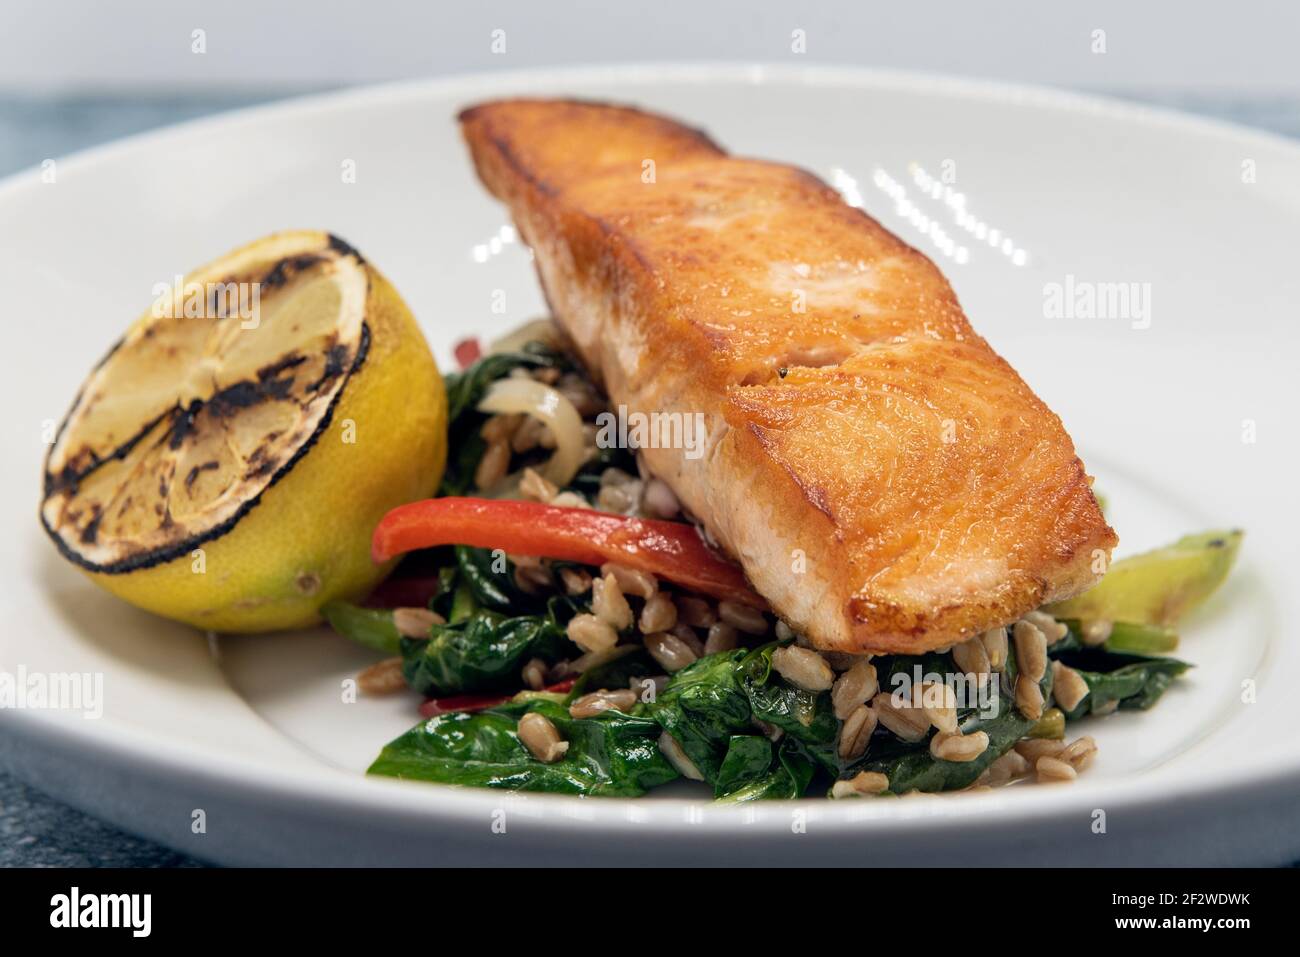 Pan roasted salmon seasoned perfectly on top a pile of barley and garnished with grilled lemon slice. Stock Photo